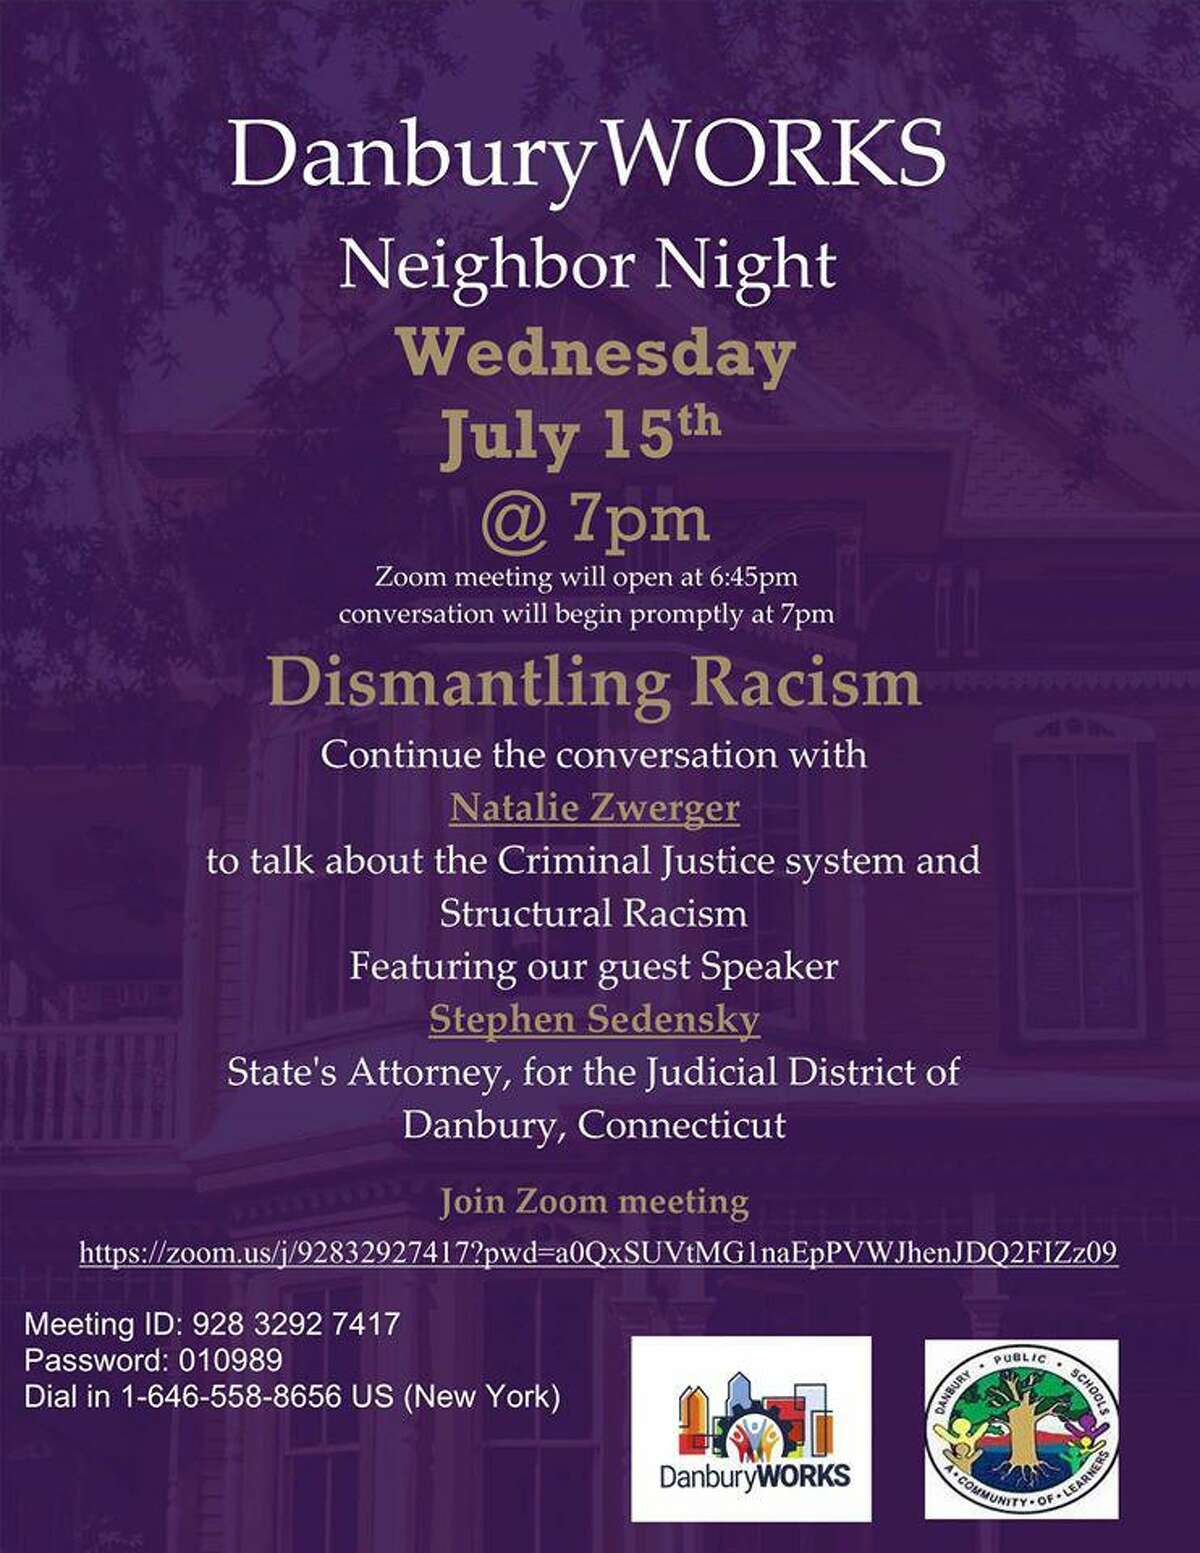 DanburyWORKS will host the forum on dismantling racism at 7 p.m. on Wednesday.